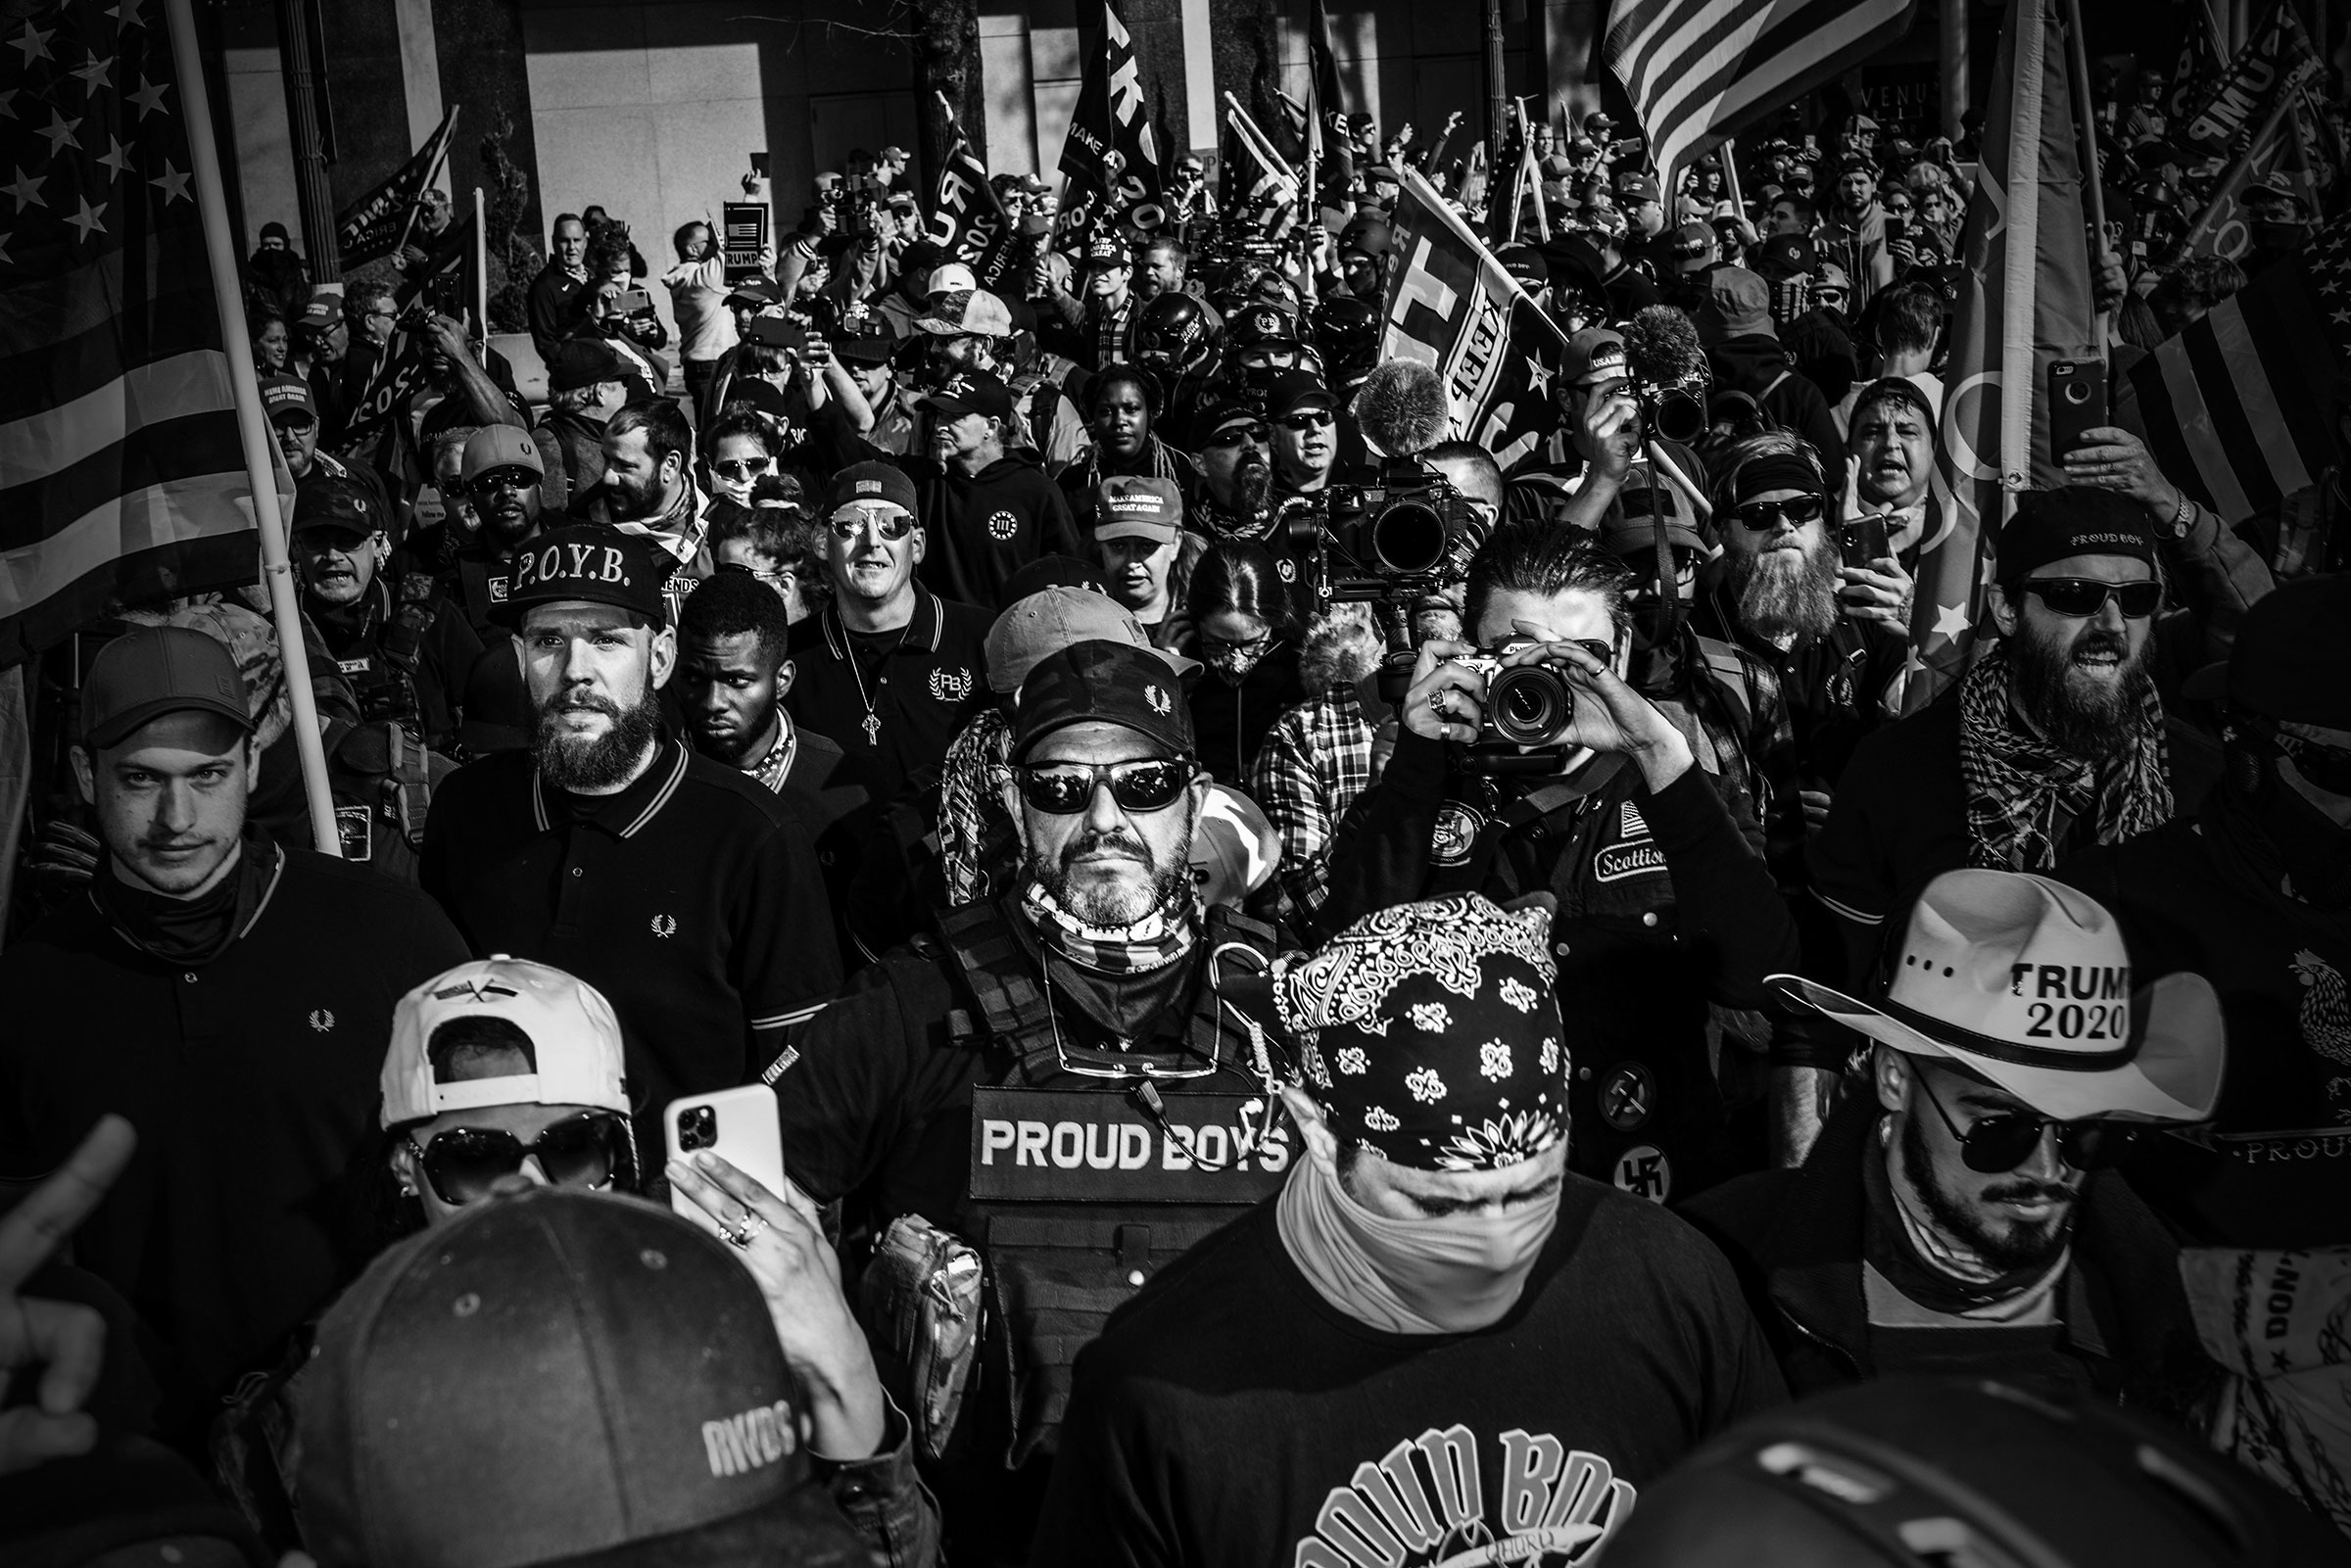 Proud Boys, led by their chairman Enrique Tarrio, gather and march on the morning of the Million MAGA March, in Washington, on Nov. 14, 2020. (Mark Peterson—Redux)